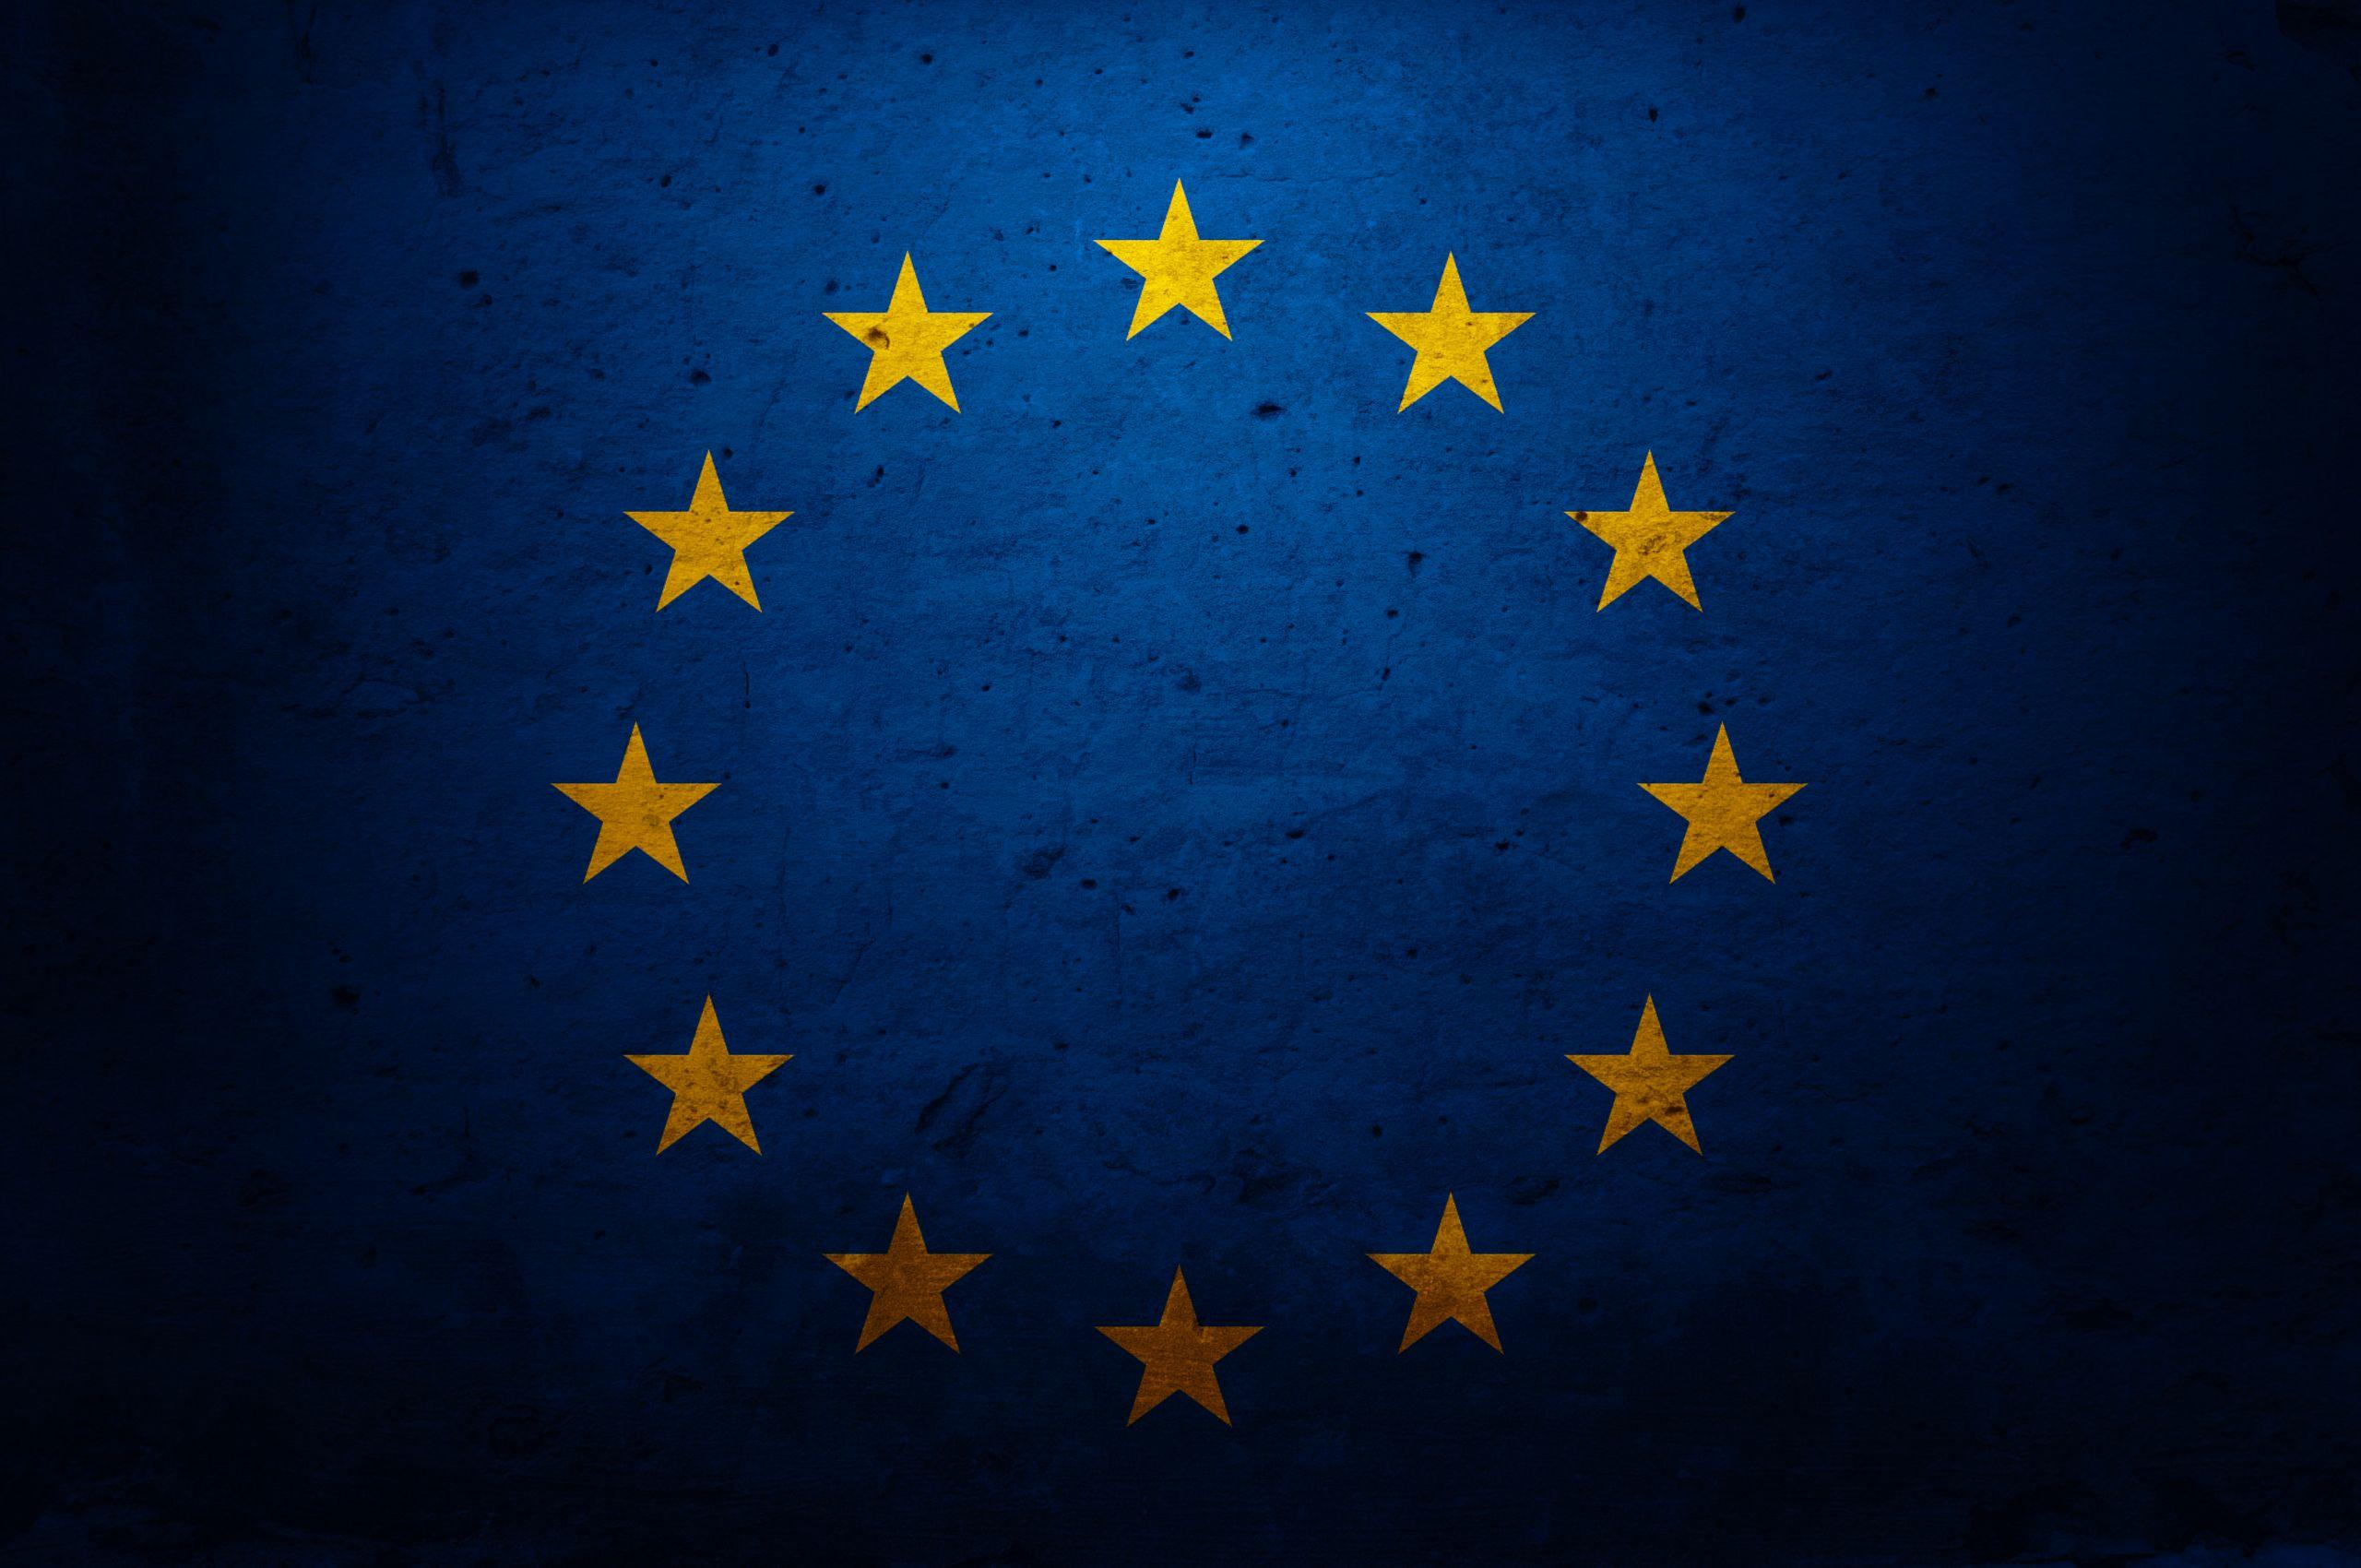 4 European Union Flags HD Wallpapers